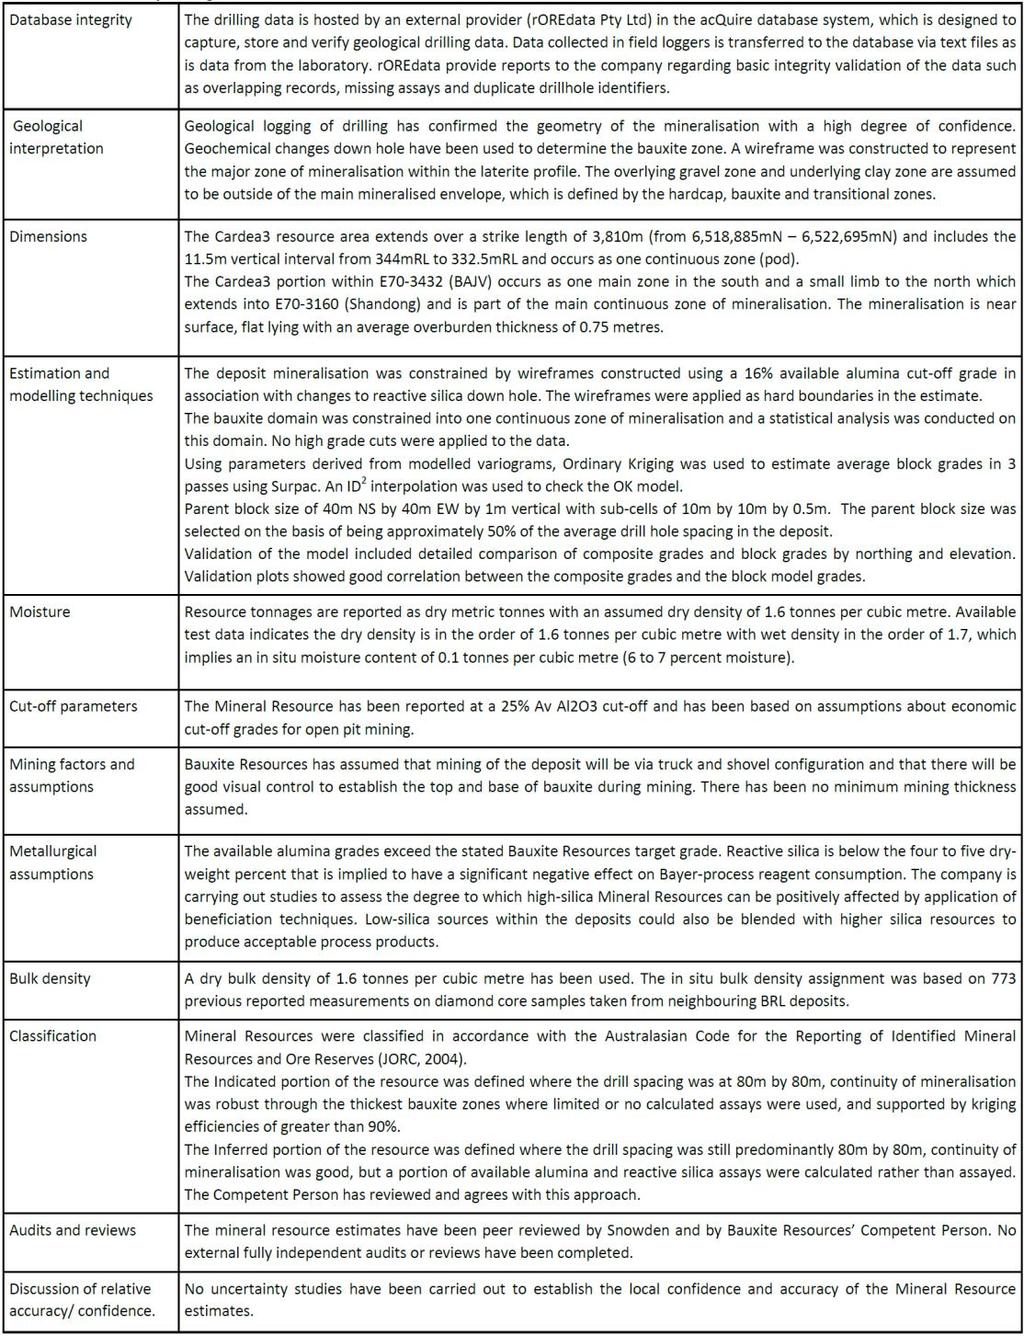 JORC LIST OF ASSESSMENT AND REPORTING CRITERIA